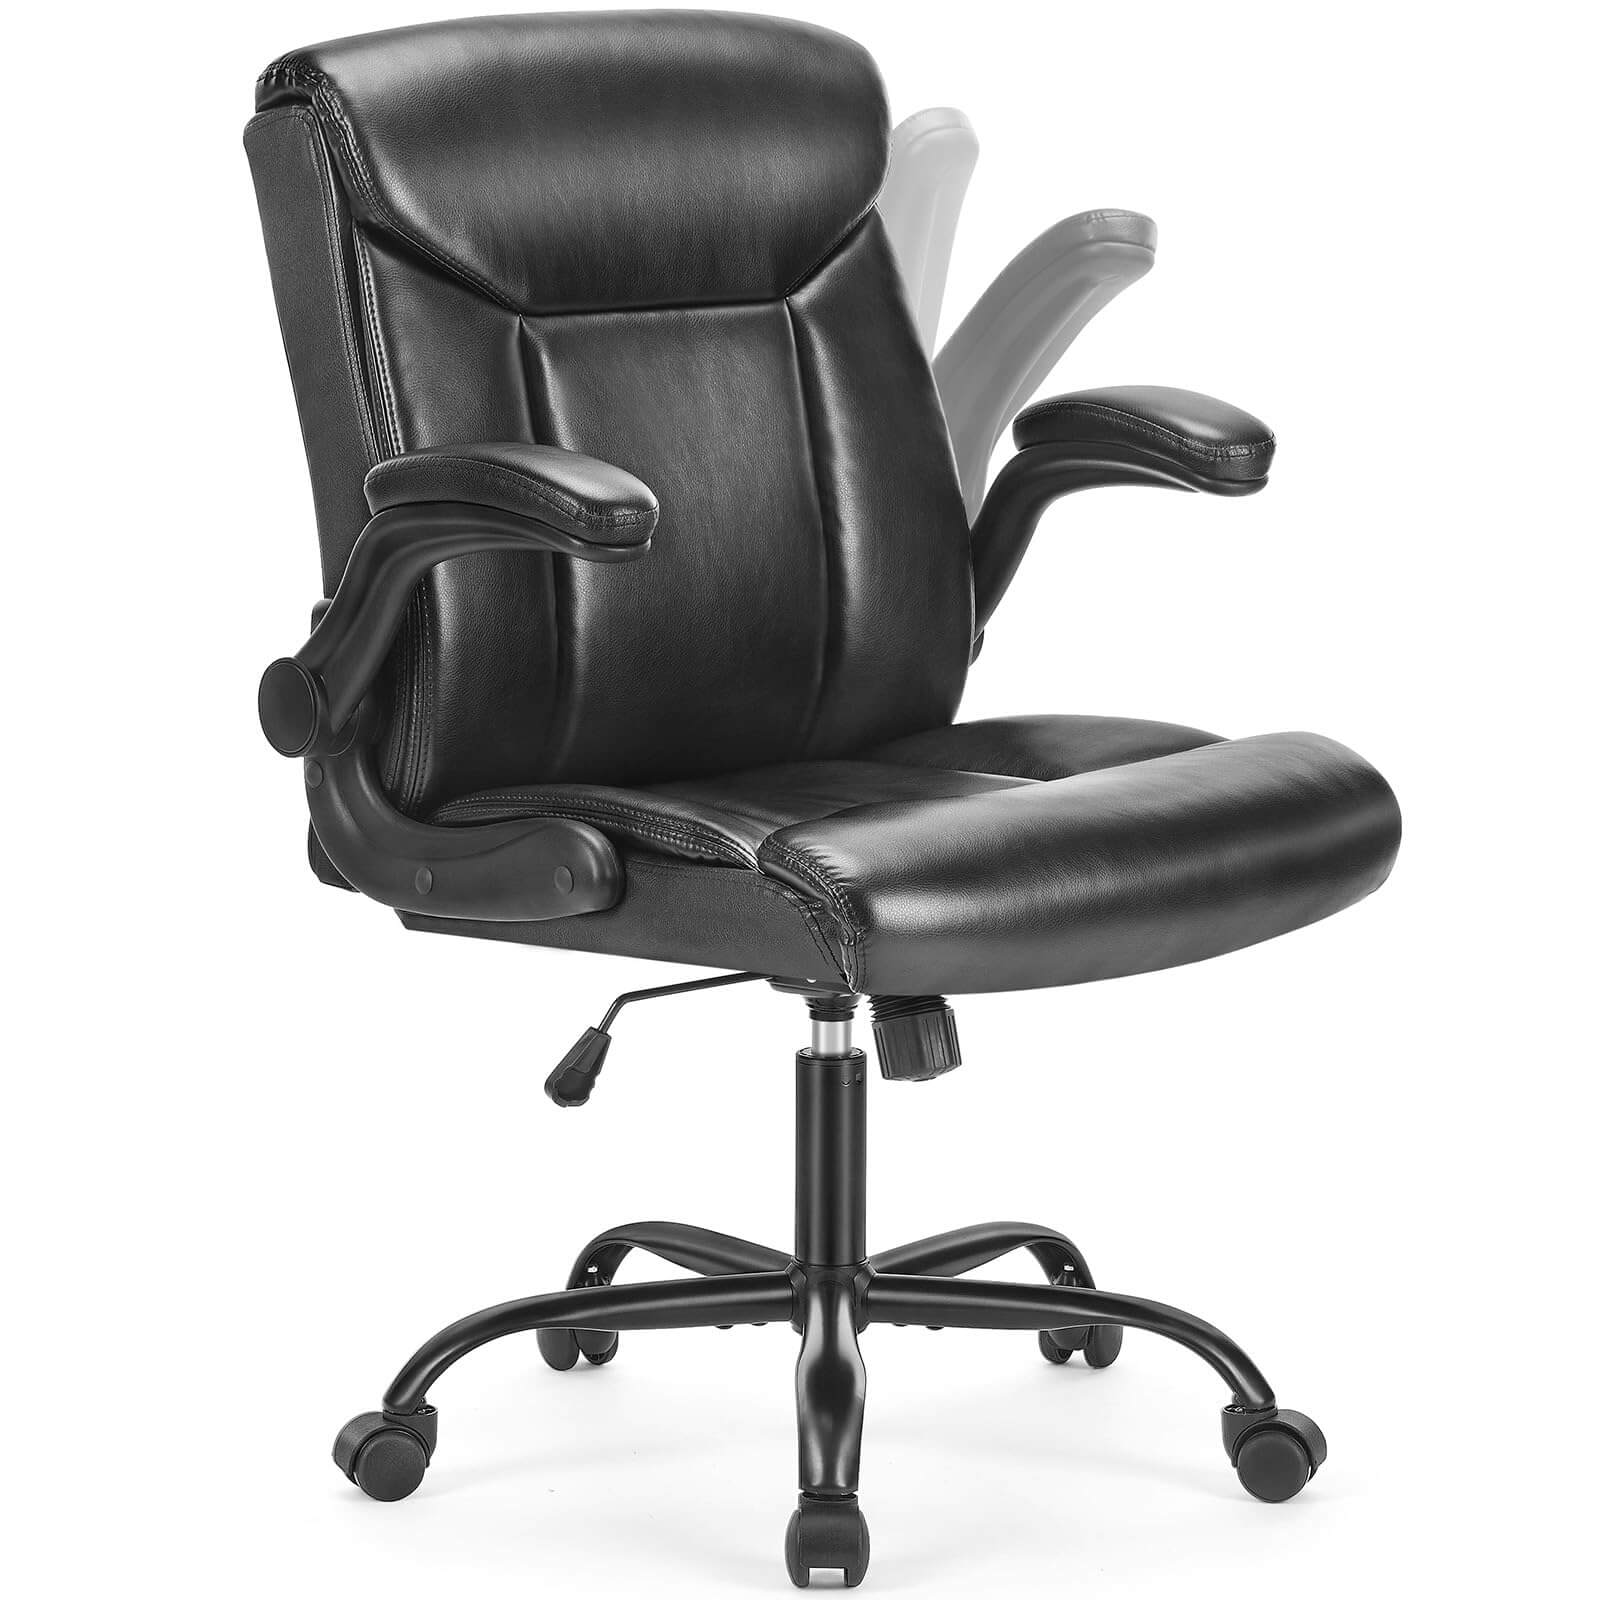 leather-adjustable-office-chair